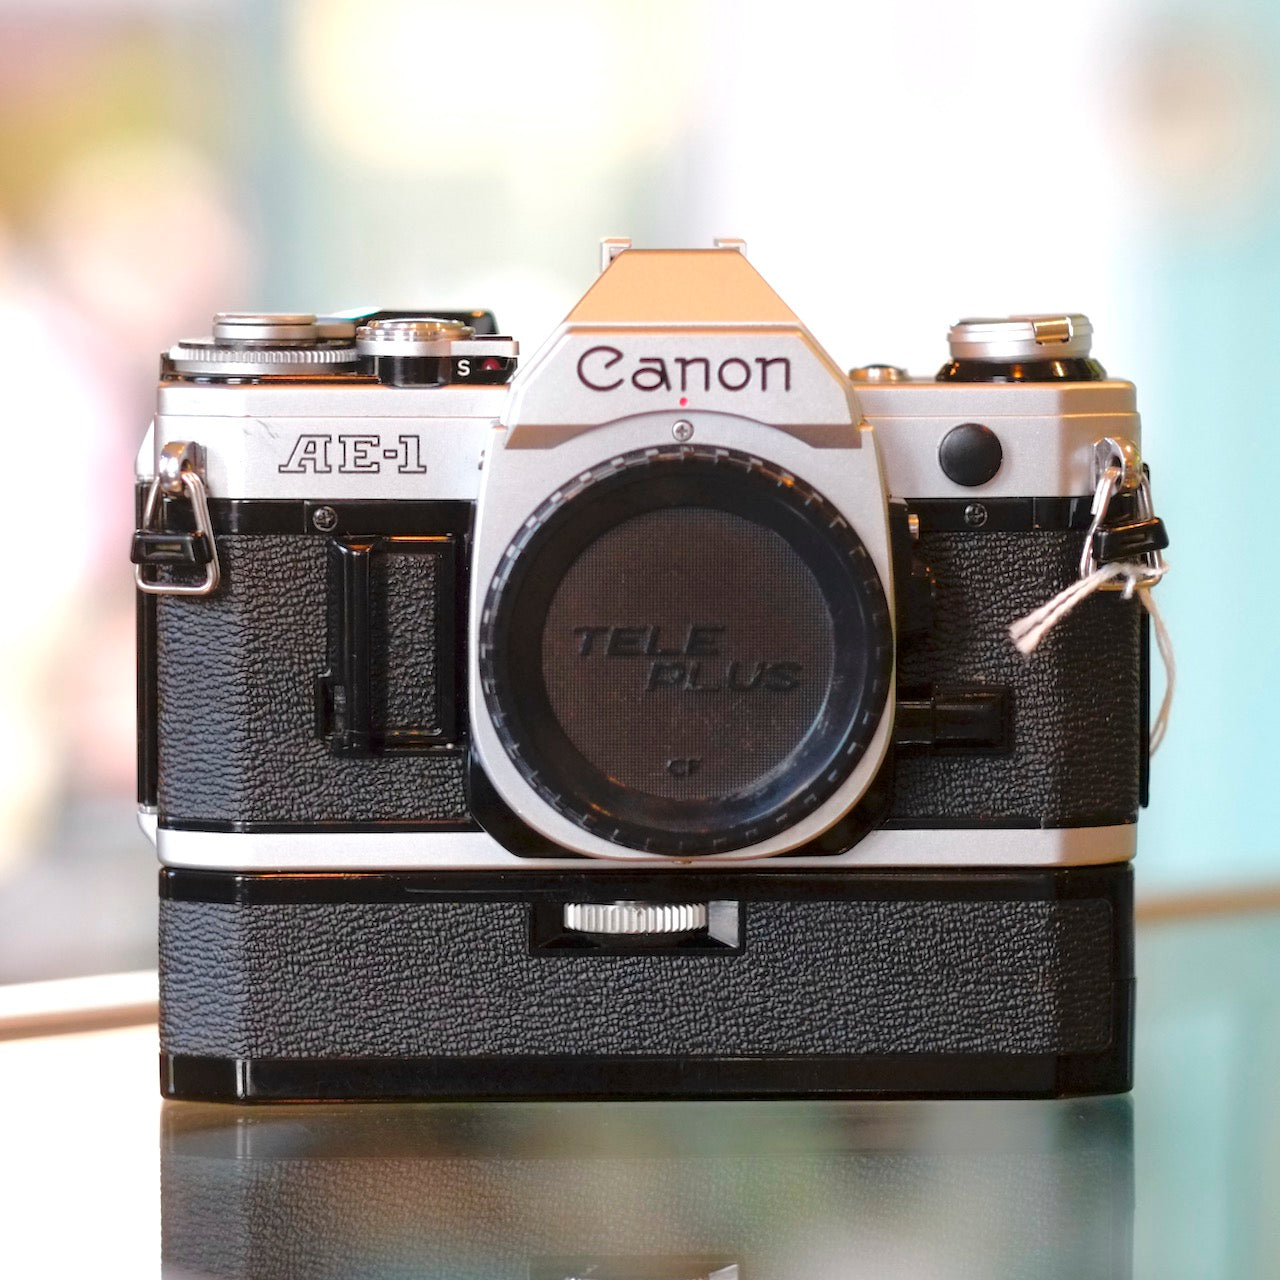 Canon AE-1 with Canon Power Winder A